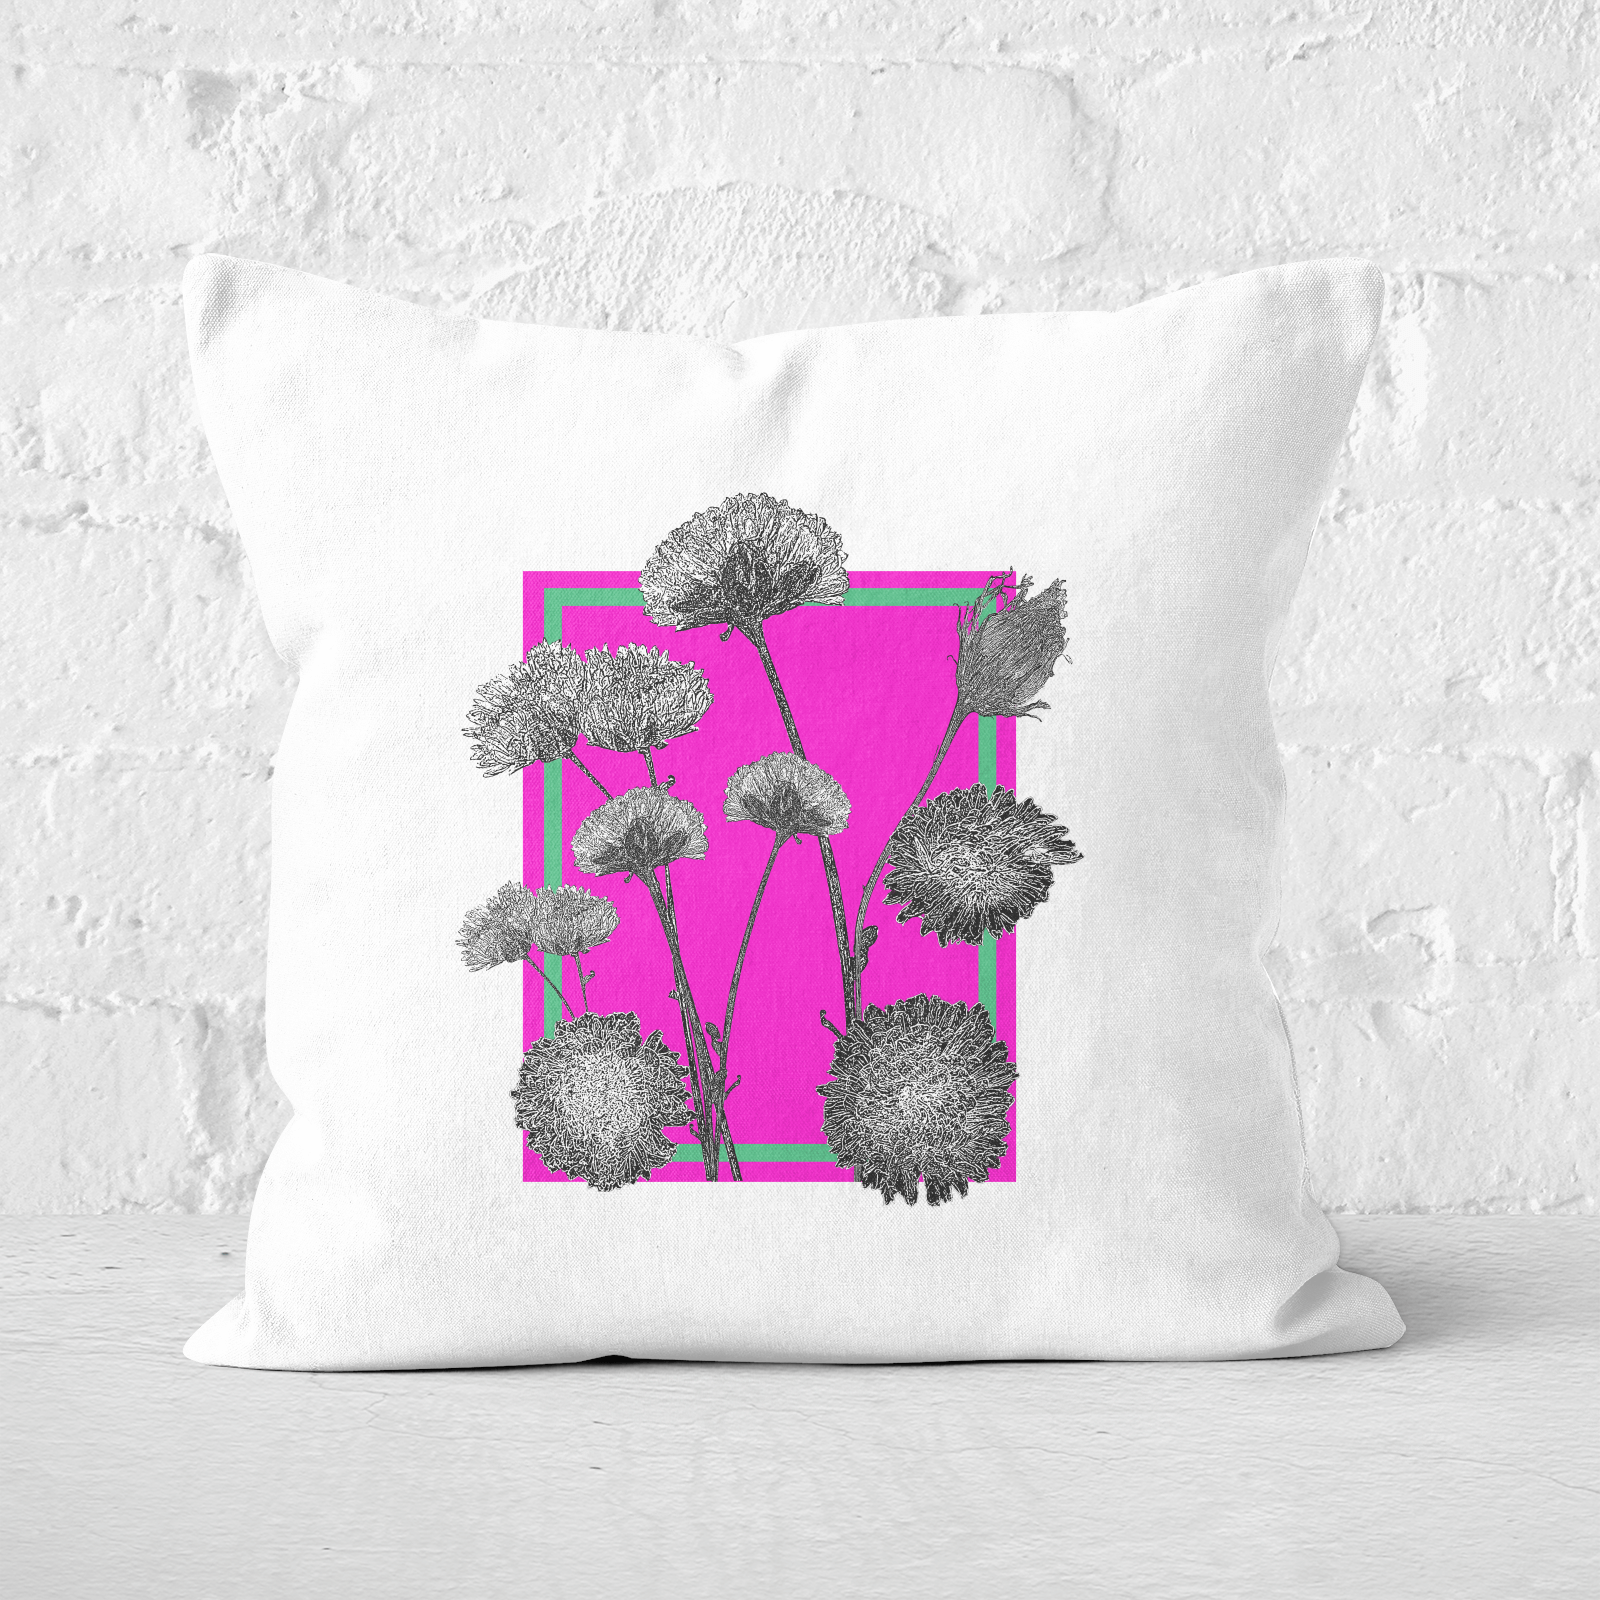 Pressed Flowers Hot Tones Framed Sketched Flowers Square Cushion - 60x60cm - Soft Touch